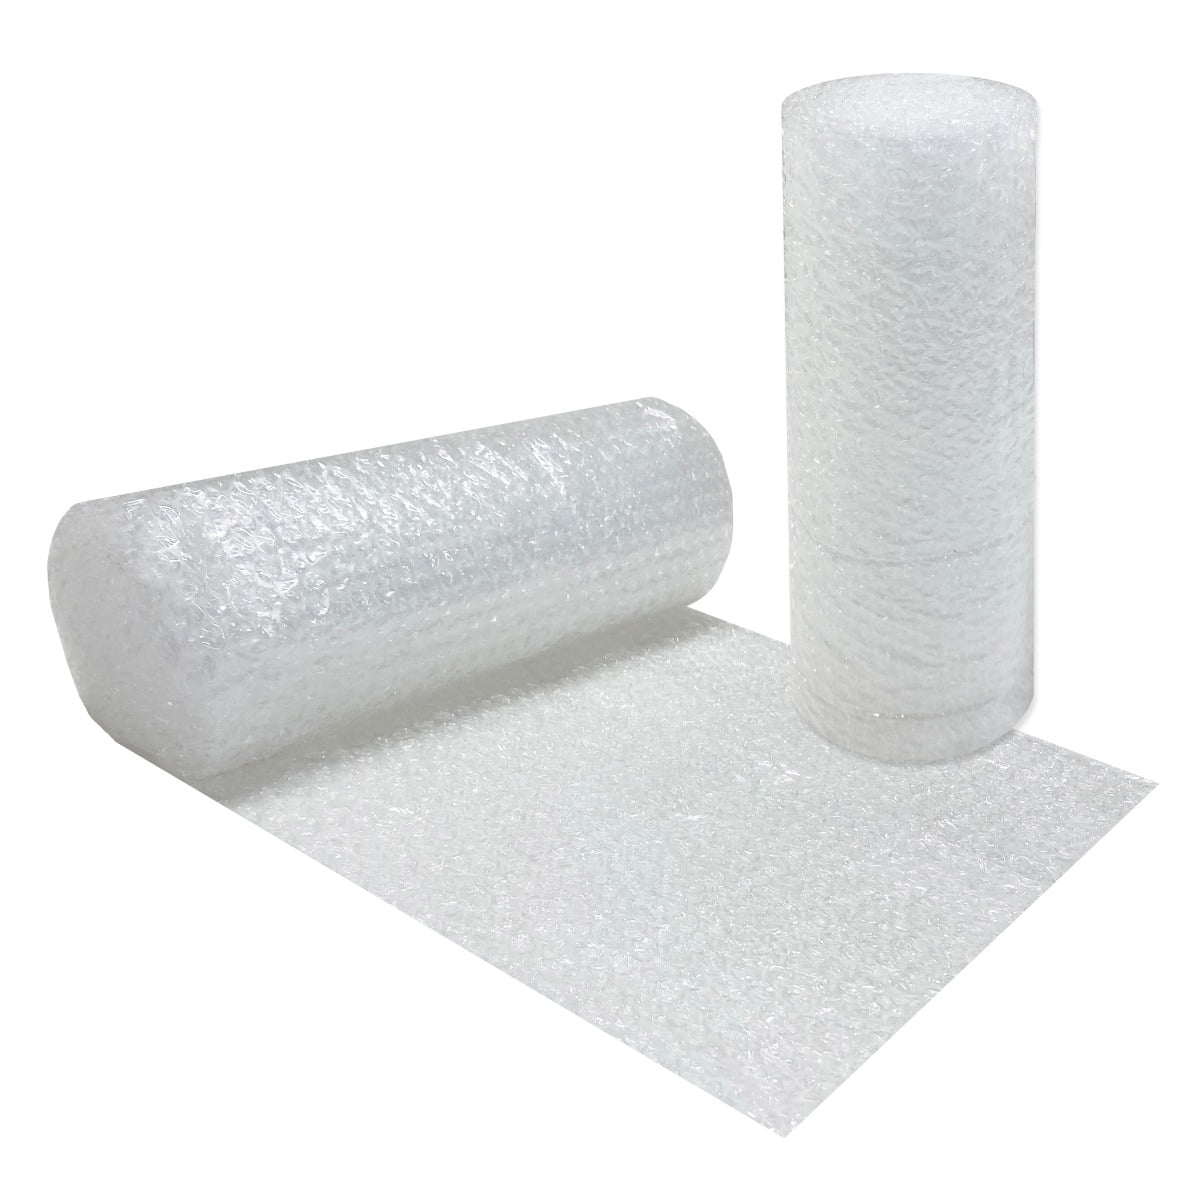 3/16 inch Perforated Small Bubble uBoxes Bubble Roll New Improved Version 175 feet x 12 inch 